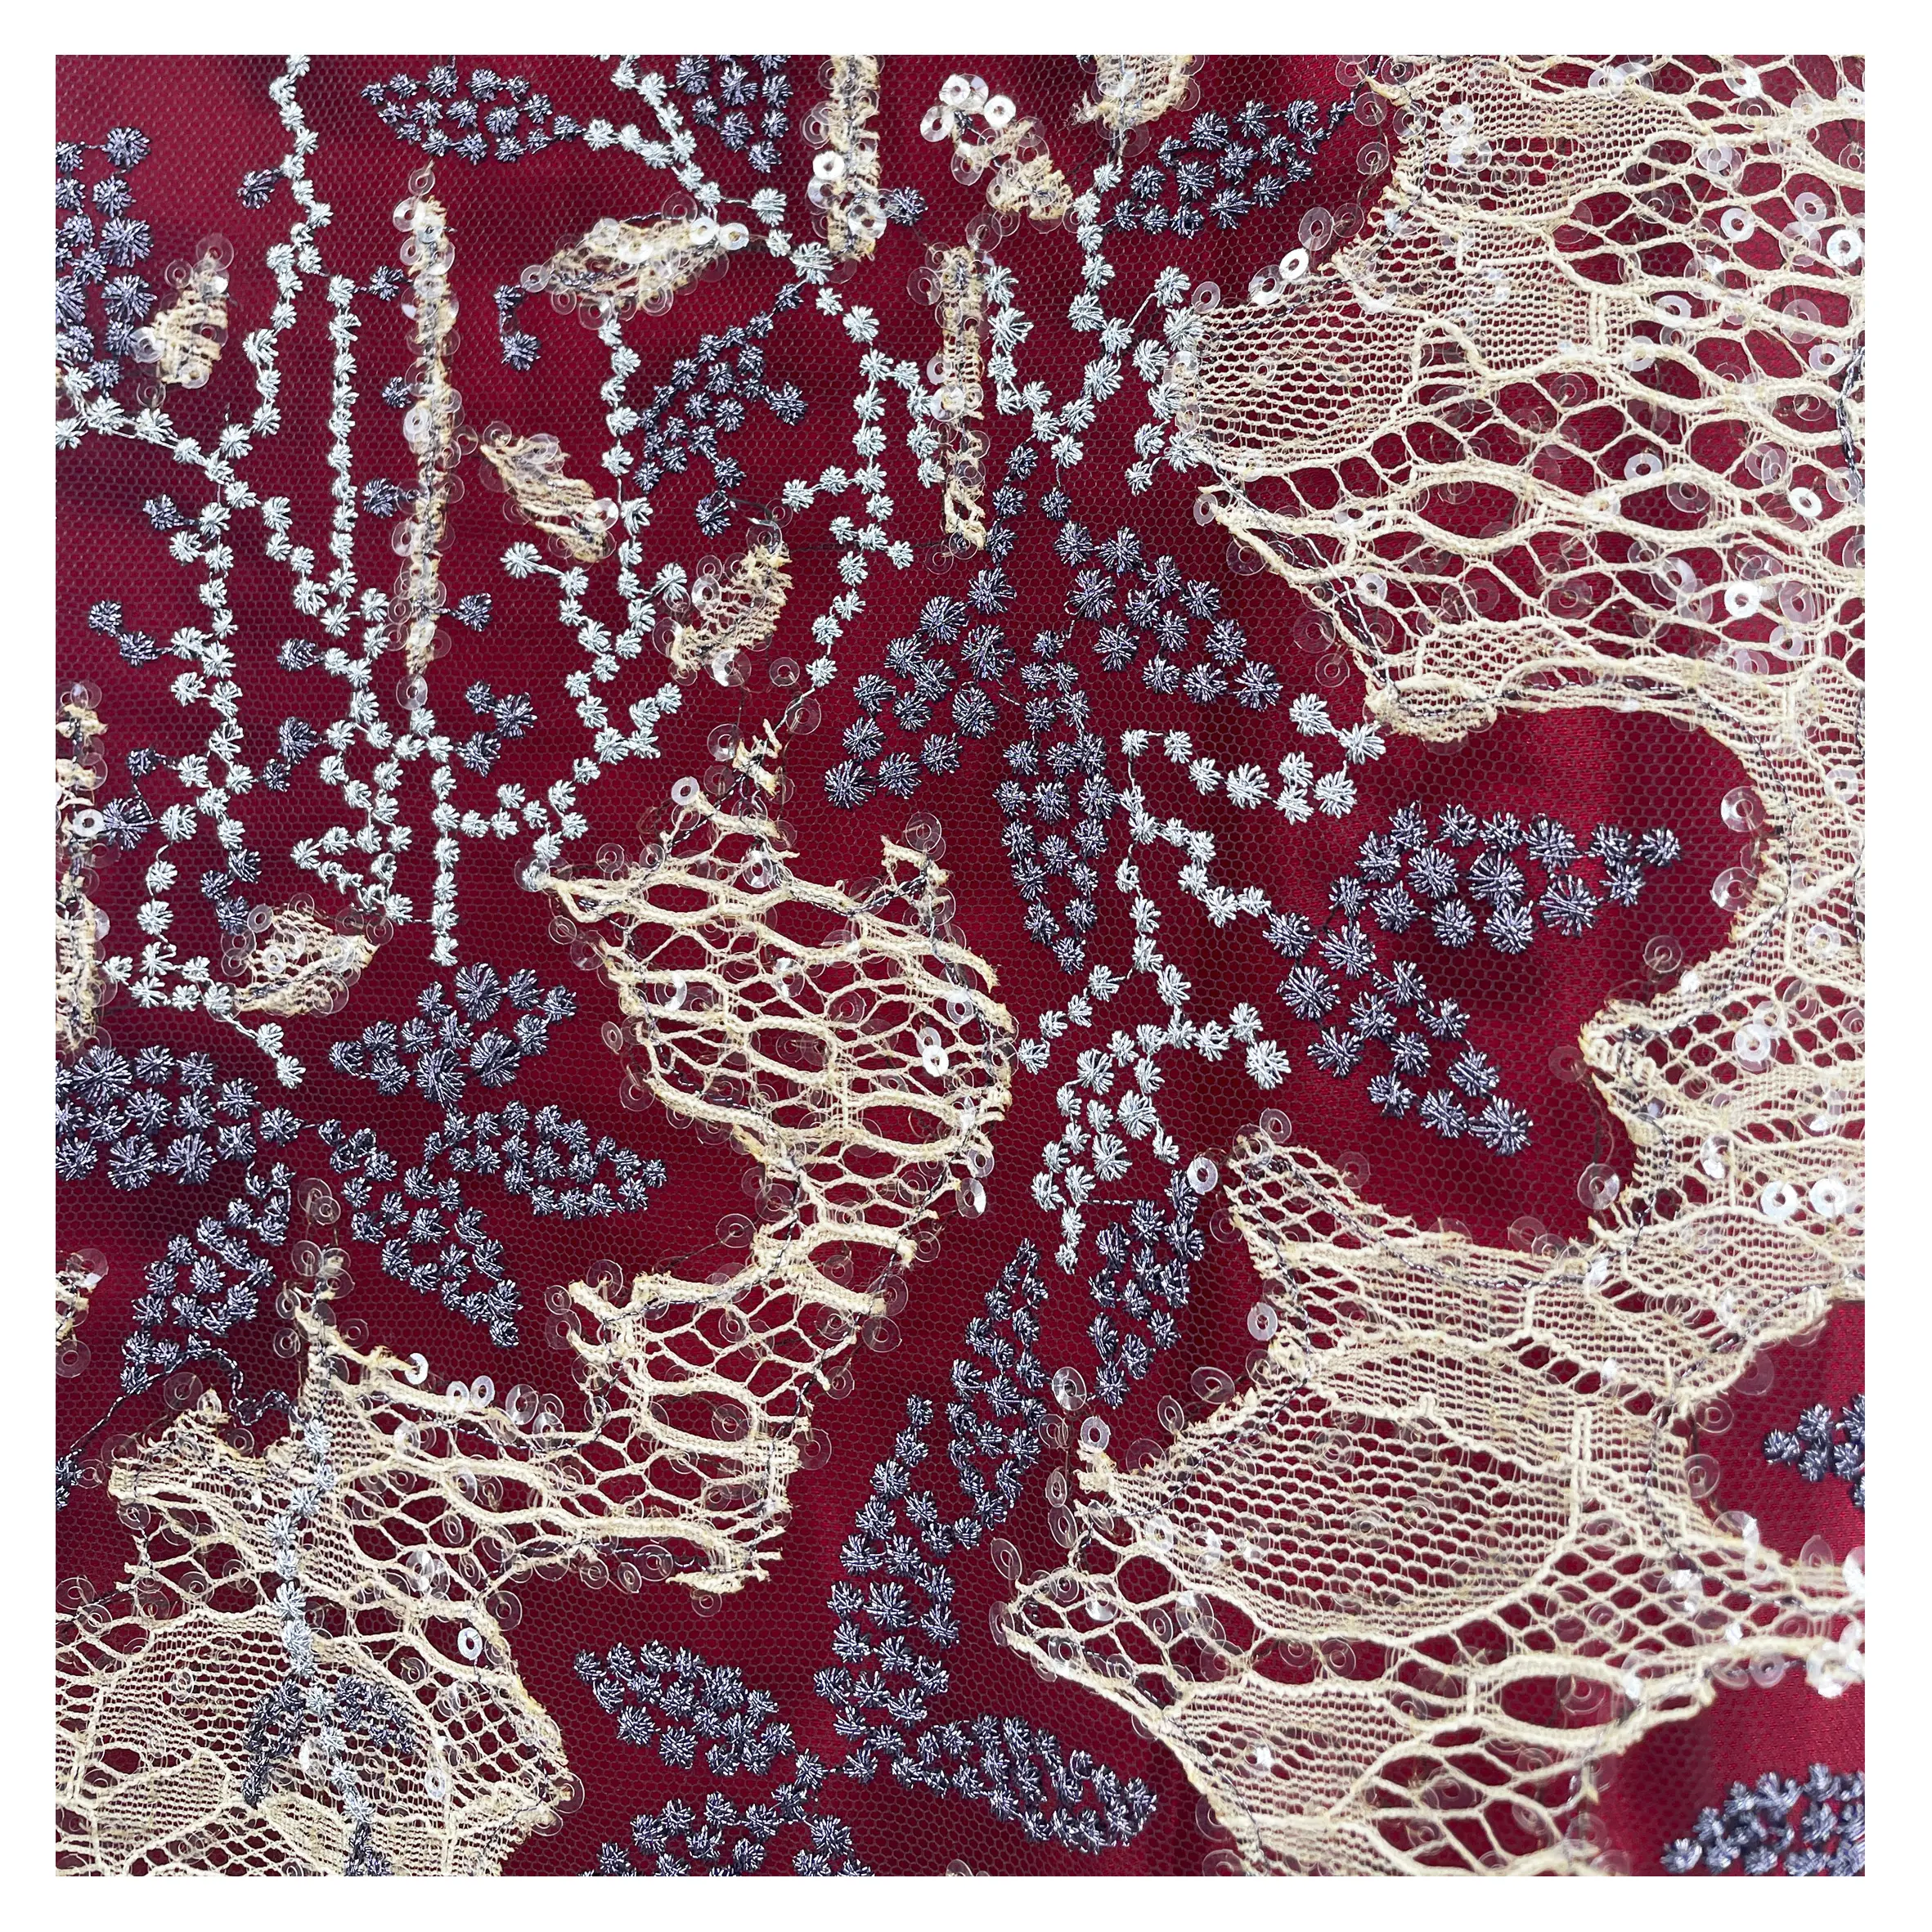 3mm 4mm sequins soft mesh lace applique metallic yarn 3mm 4mm sequins embroidery lace fabric